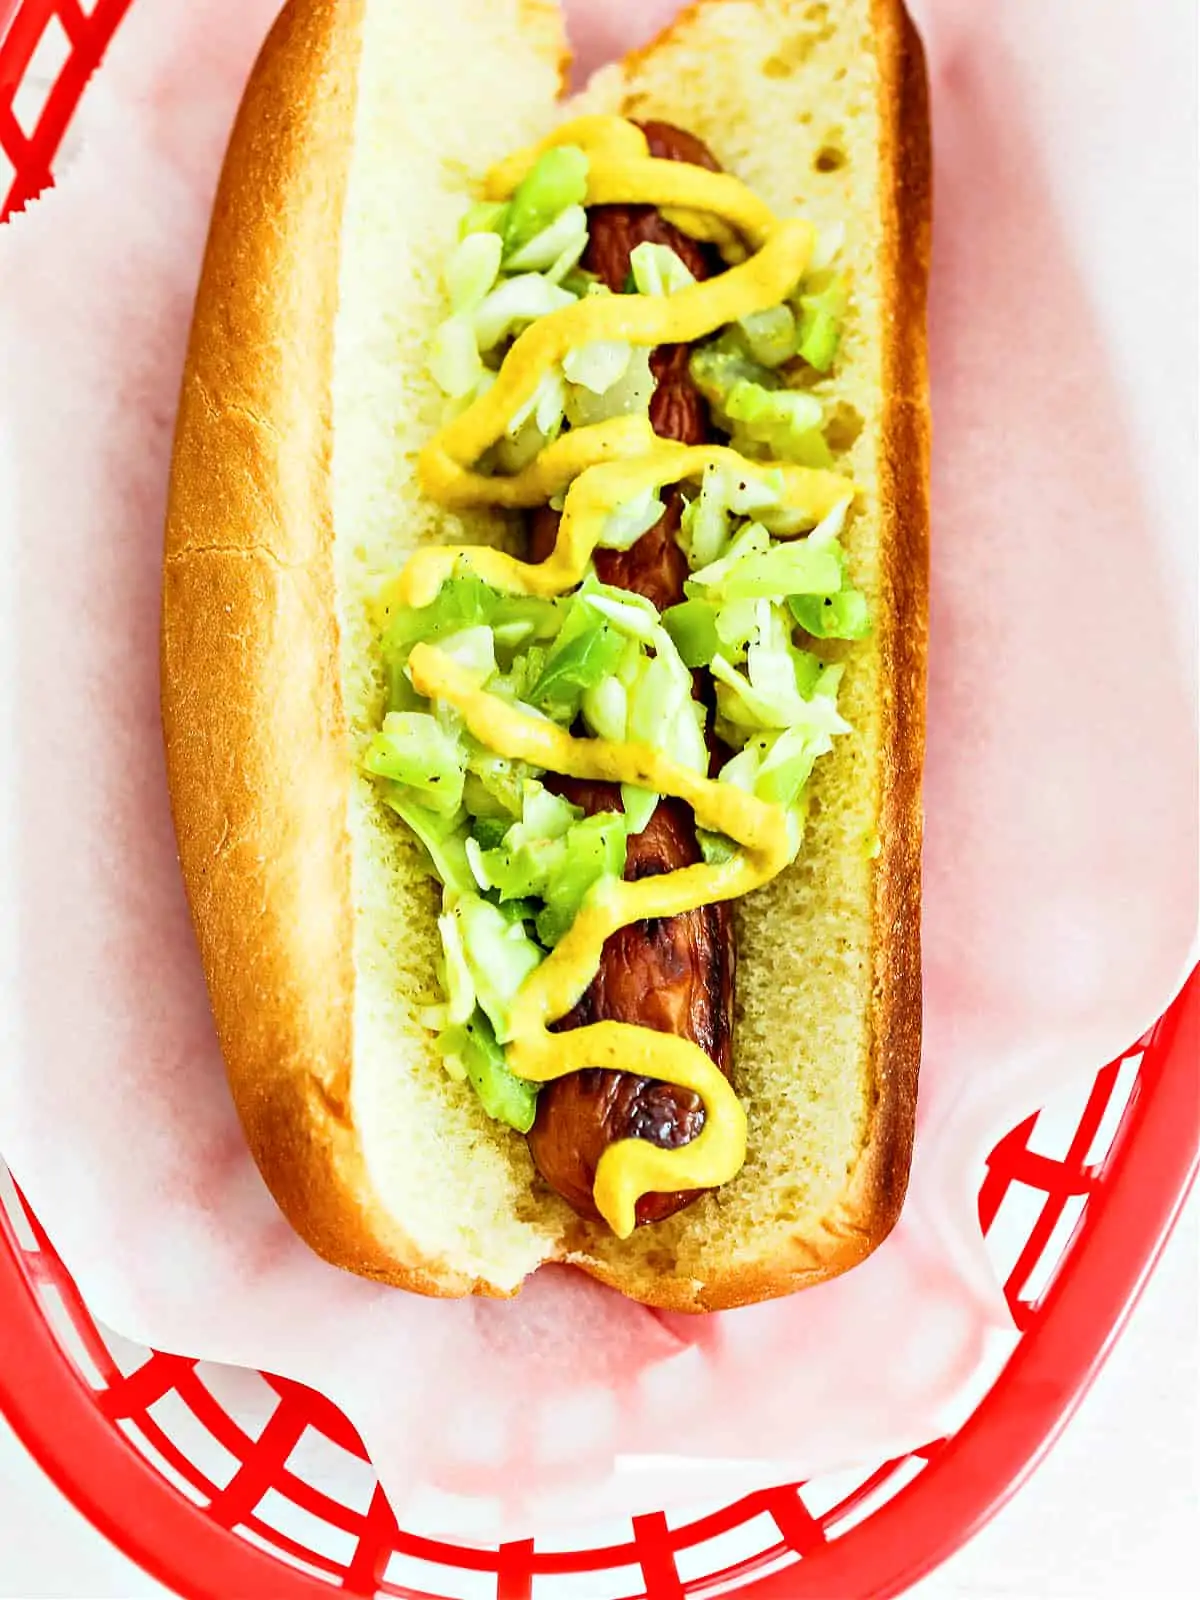 A hot dog with toppings in a red plastic basket lined with paper.